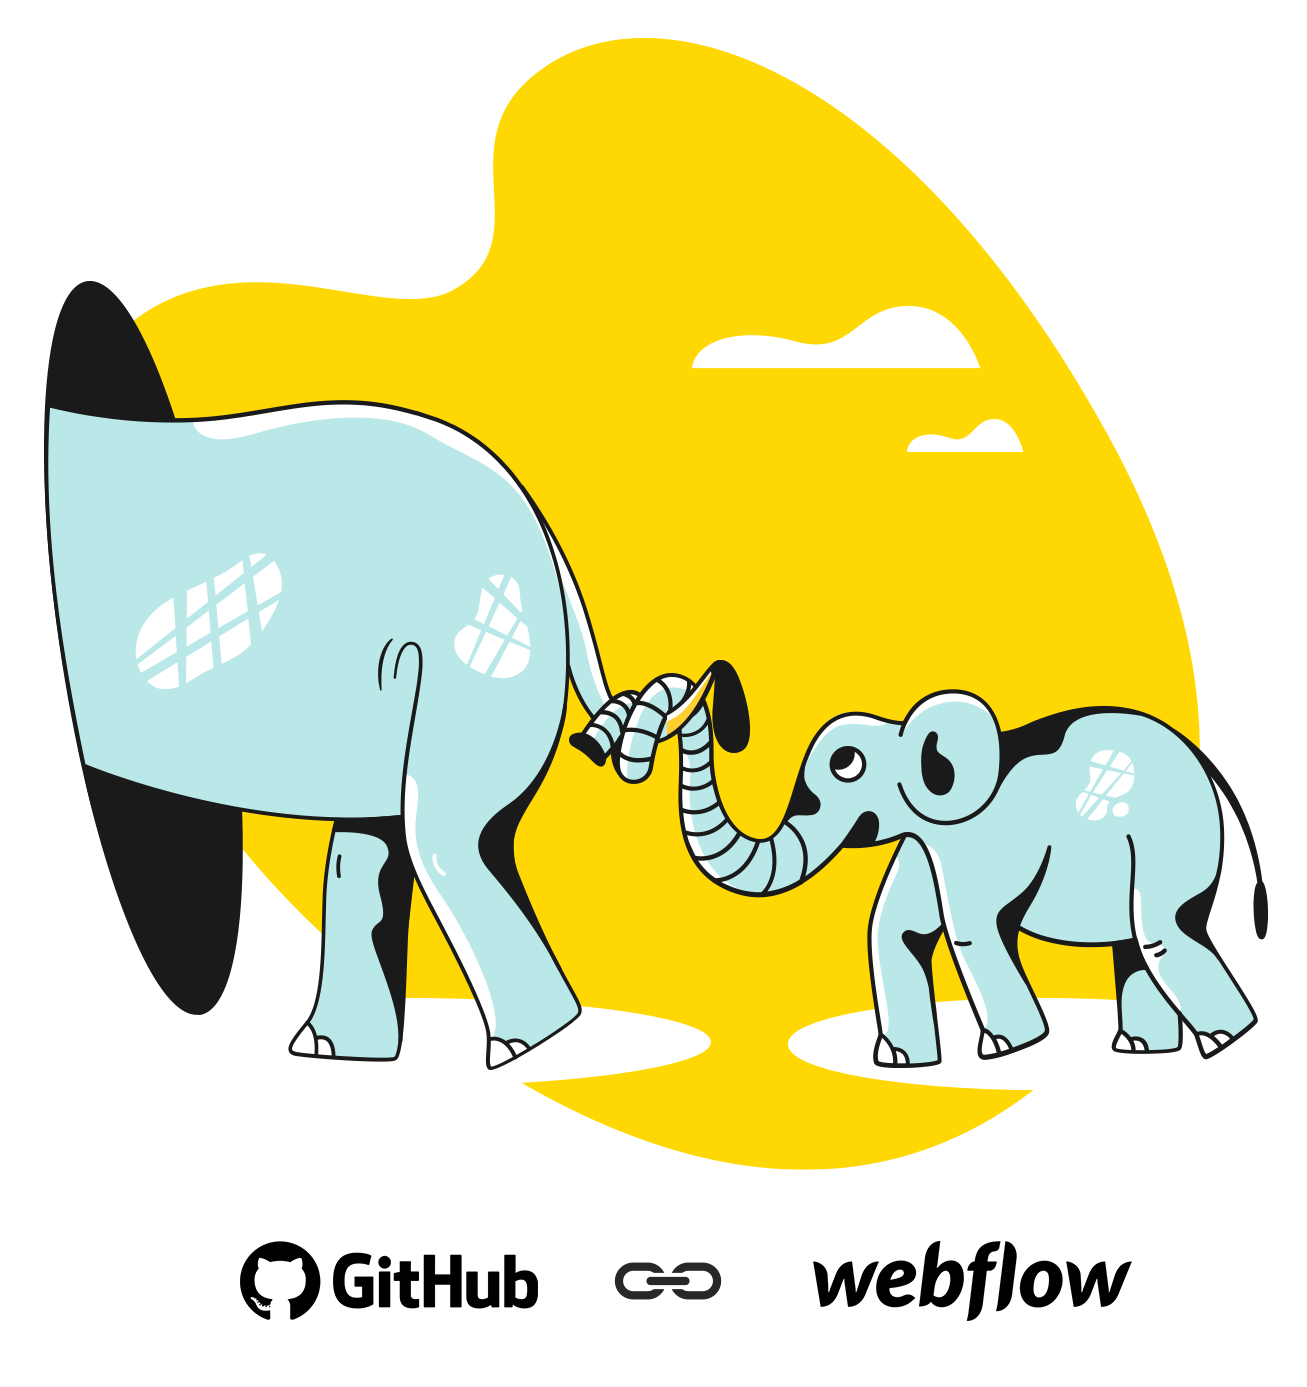 github to webflow made simple. Export your webflow site to github.